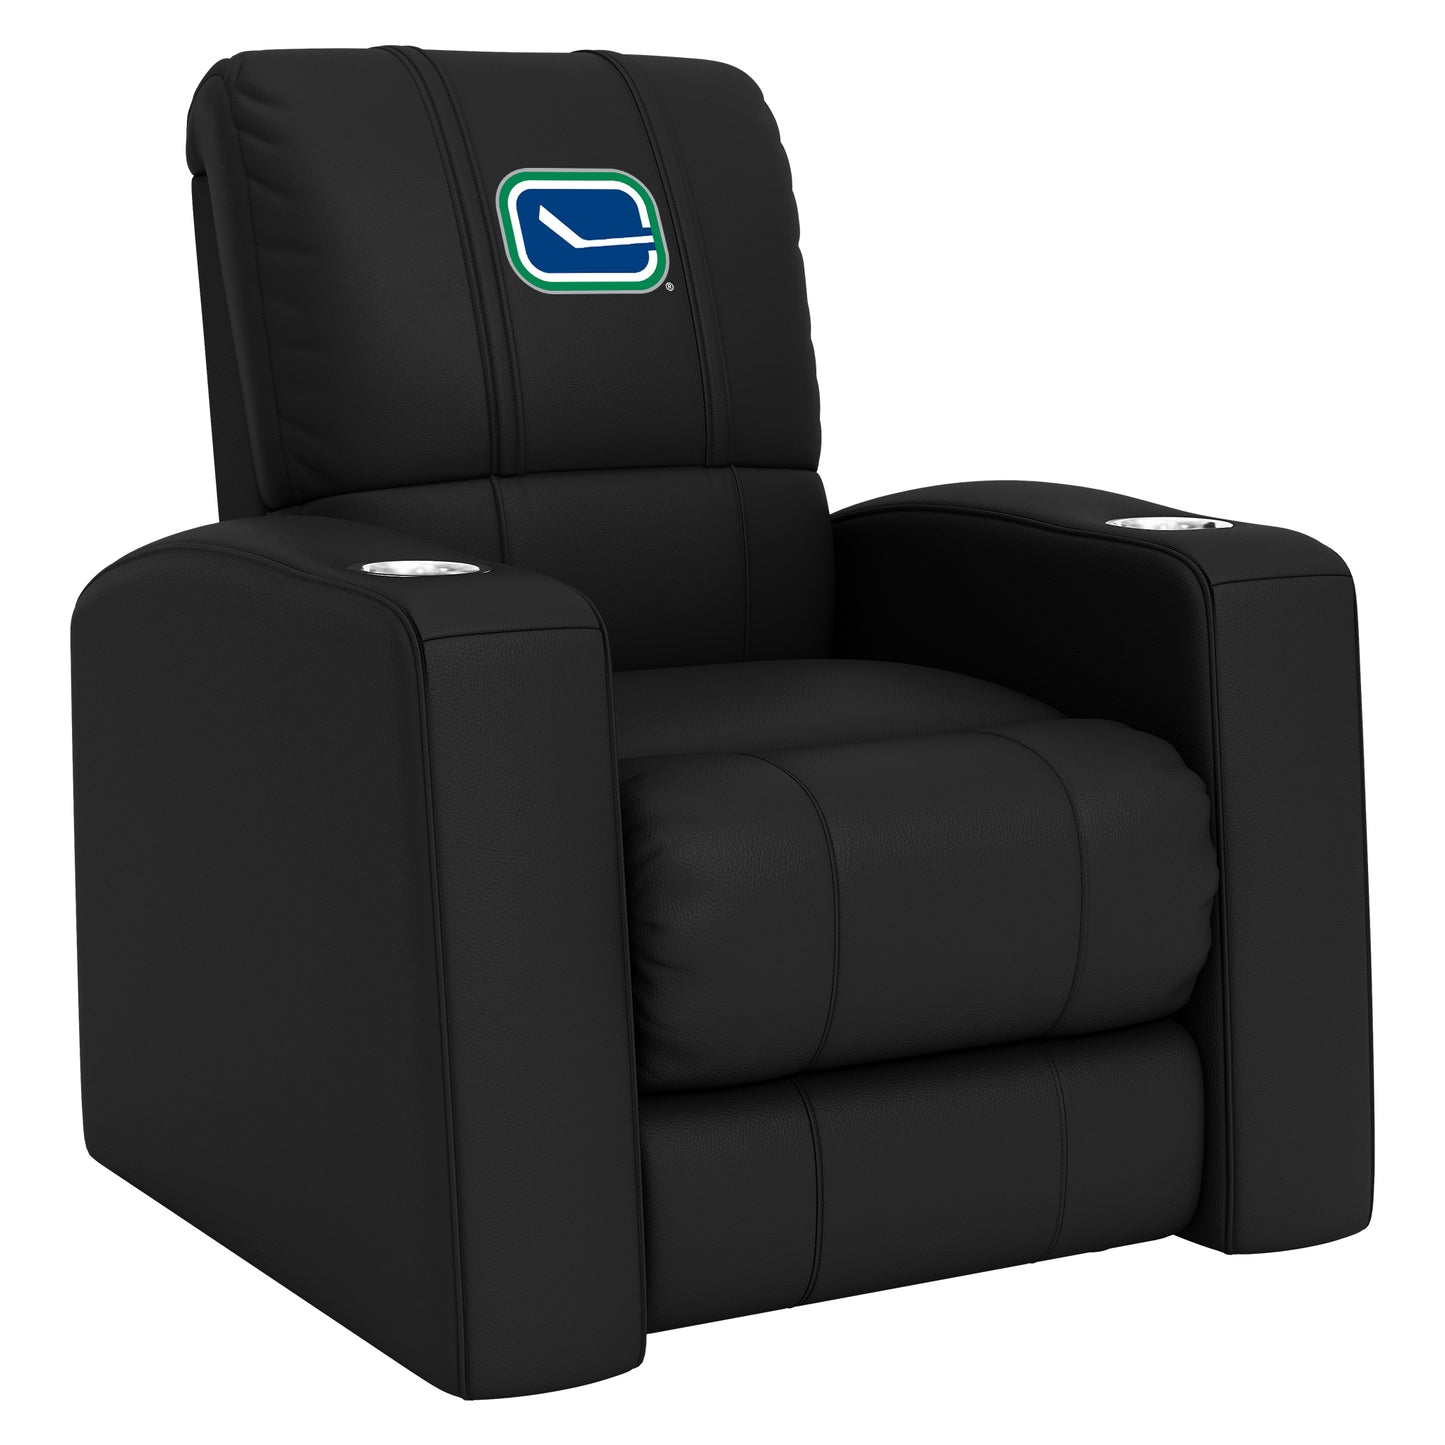 Relax Home Theater Recliner with Vancouver Canucks Secondary Logo